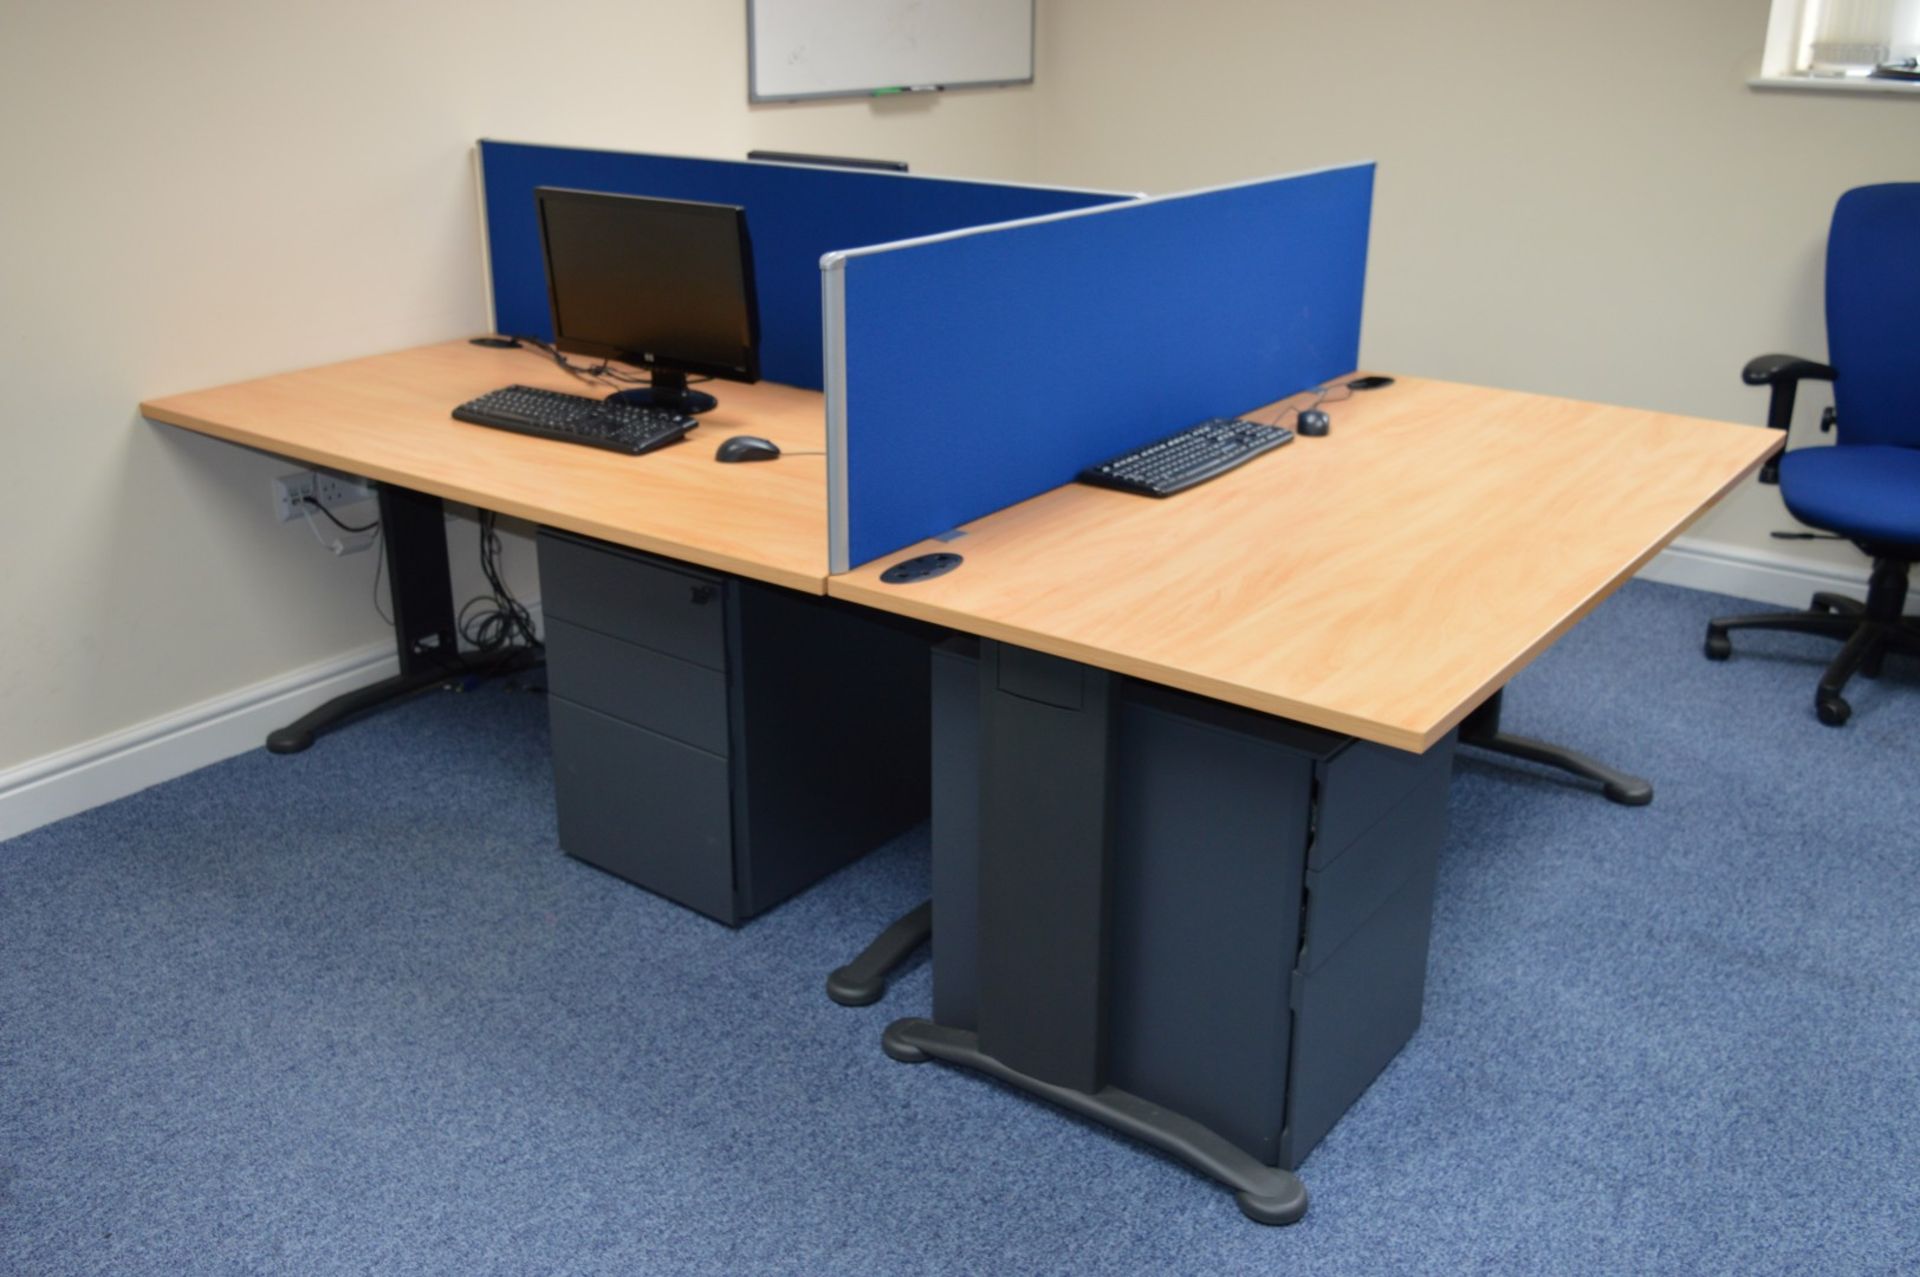 1 x Tripod Office Workstation Desk With Chairs - Suitable For 3 Users - Includes Three Premium - Image 3 of 11